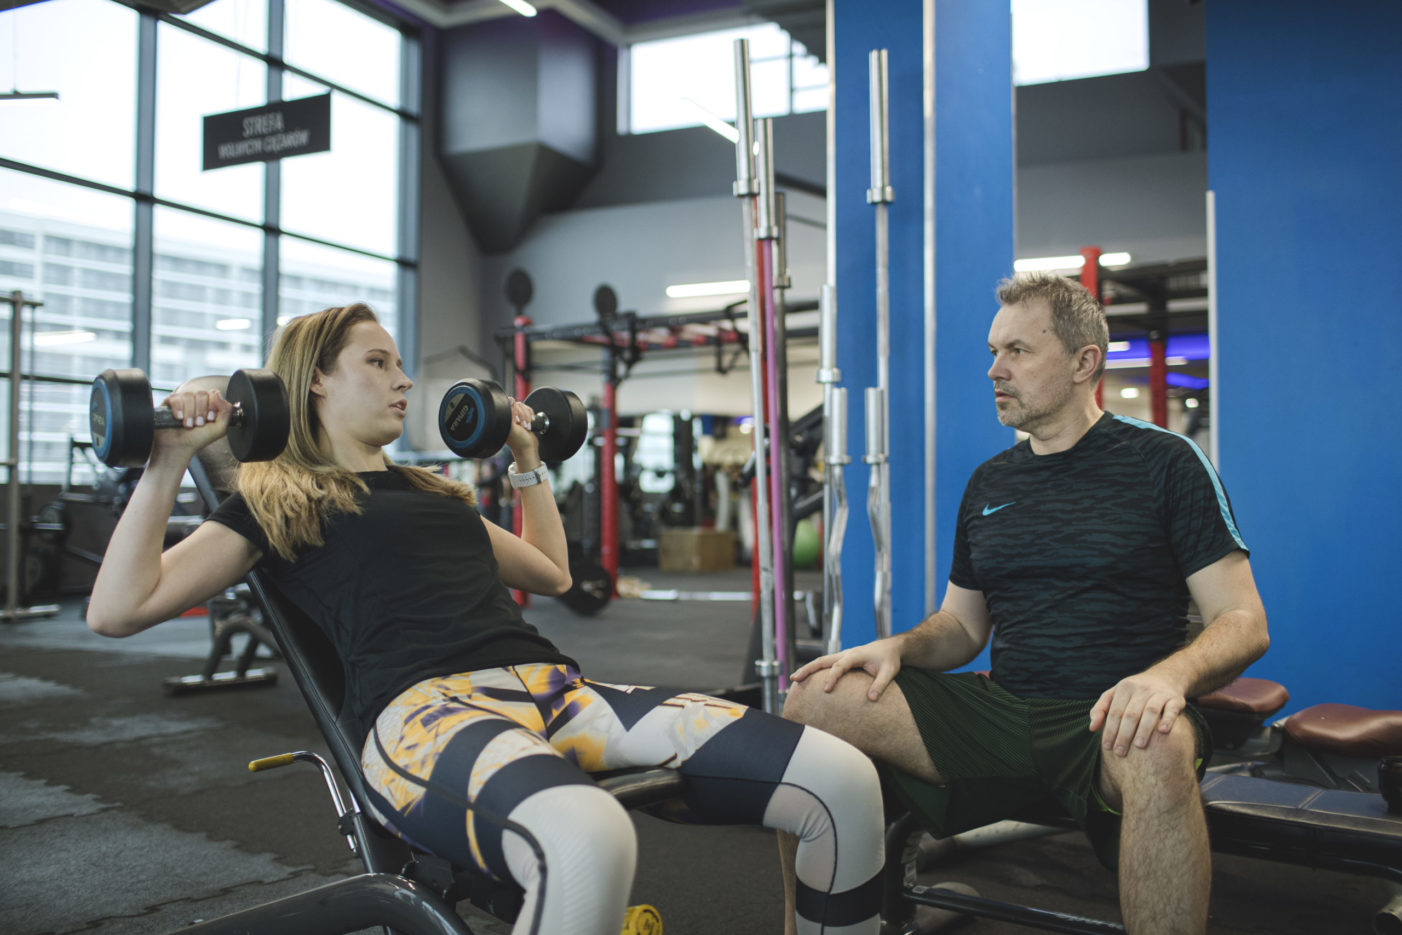 WHY A MAN PERSONAL TRAINER IS BETTER THAN WOMAN?